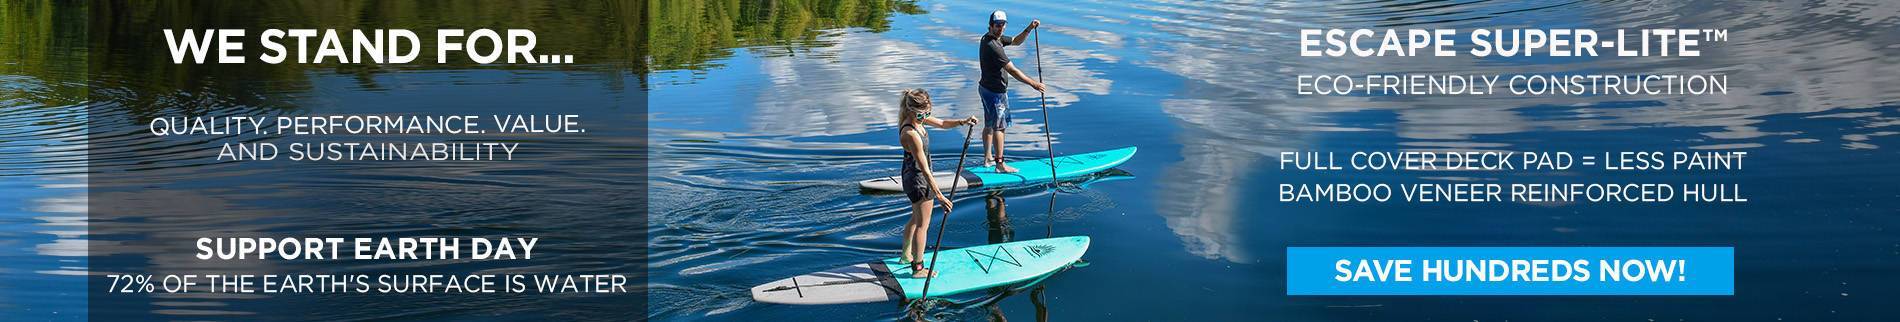 Paddle Boards with Full Wrap Deck Pad